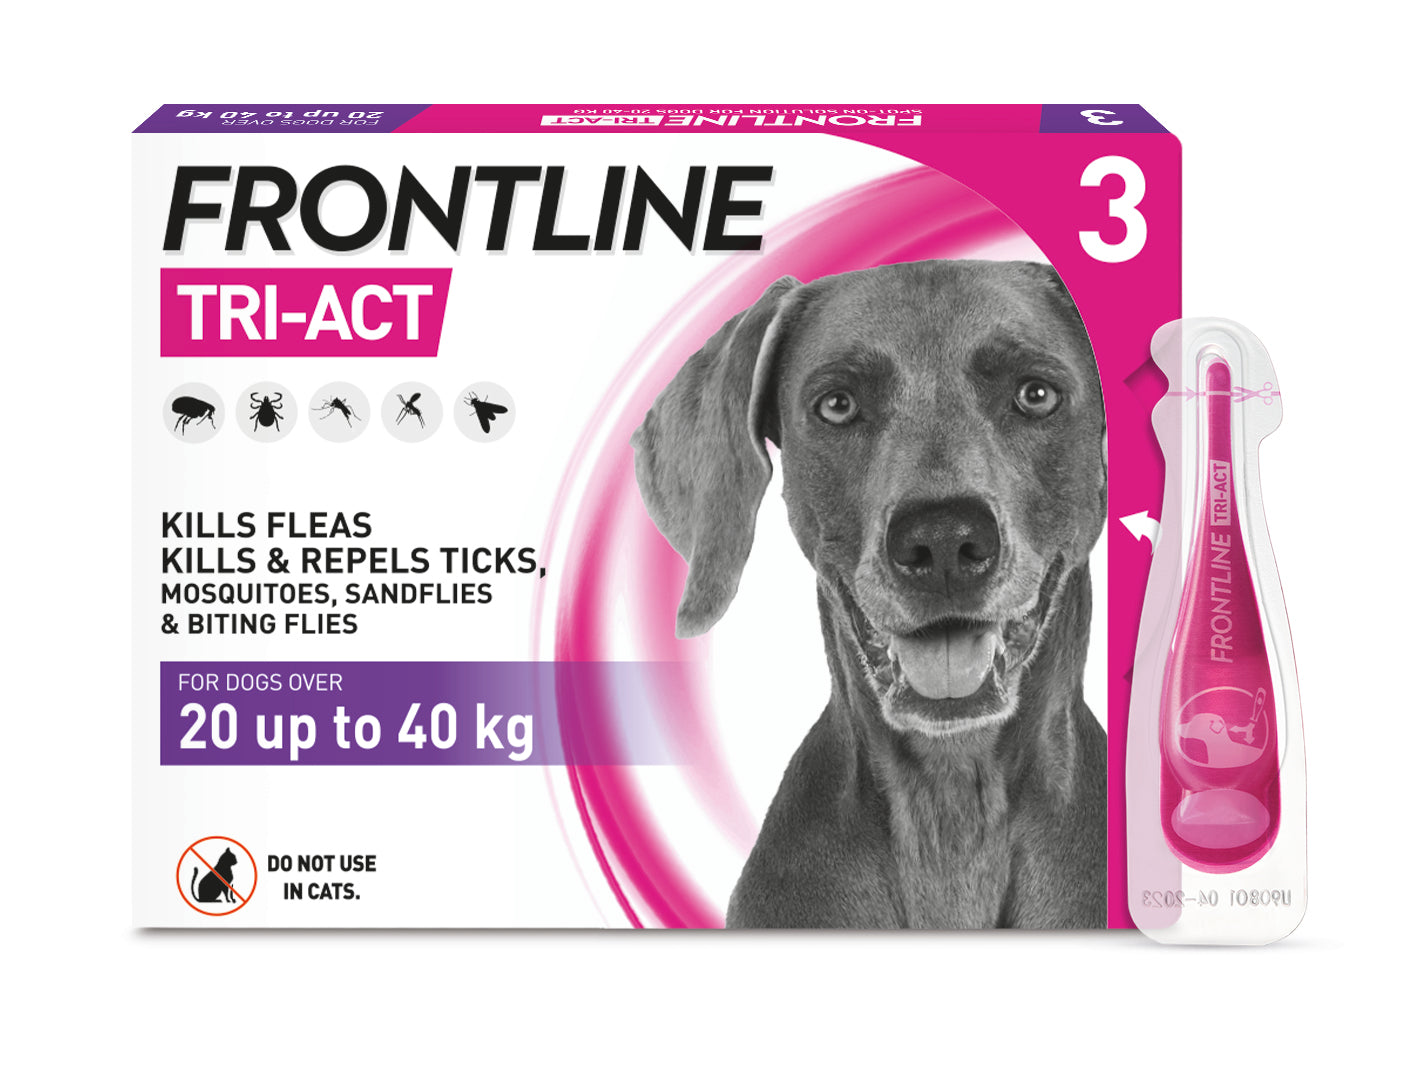 FRONTLINE Tri-Act Flea & Tick Treatment for Dogs